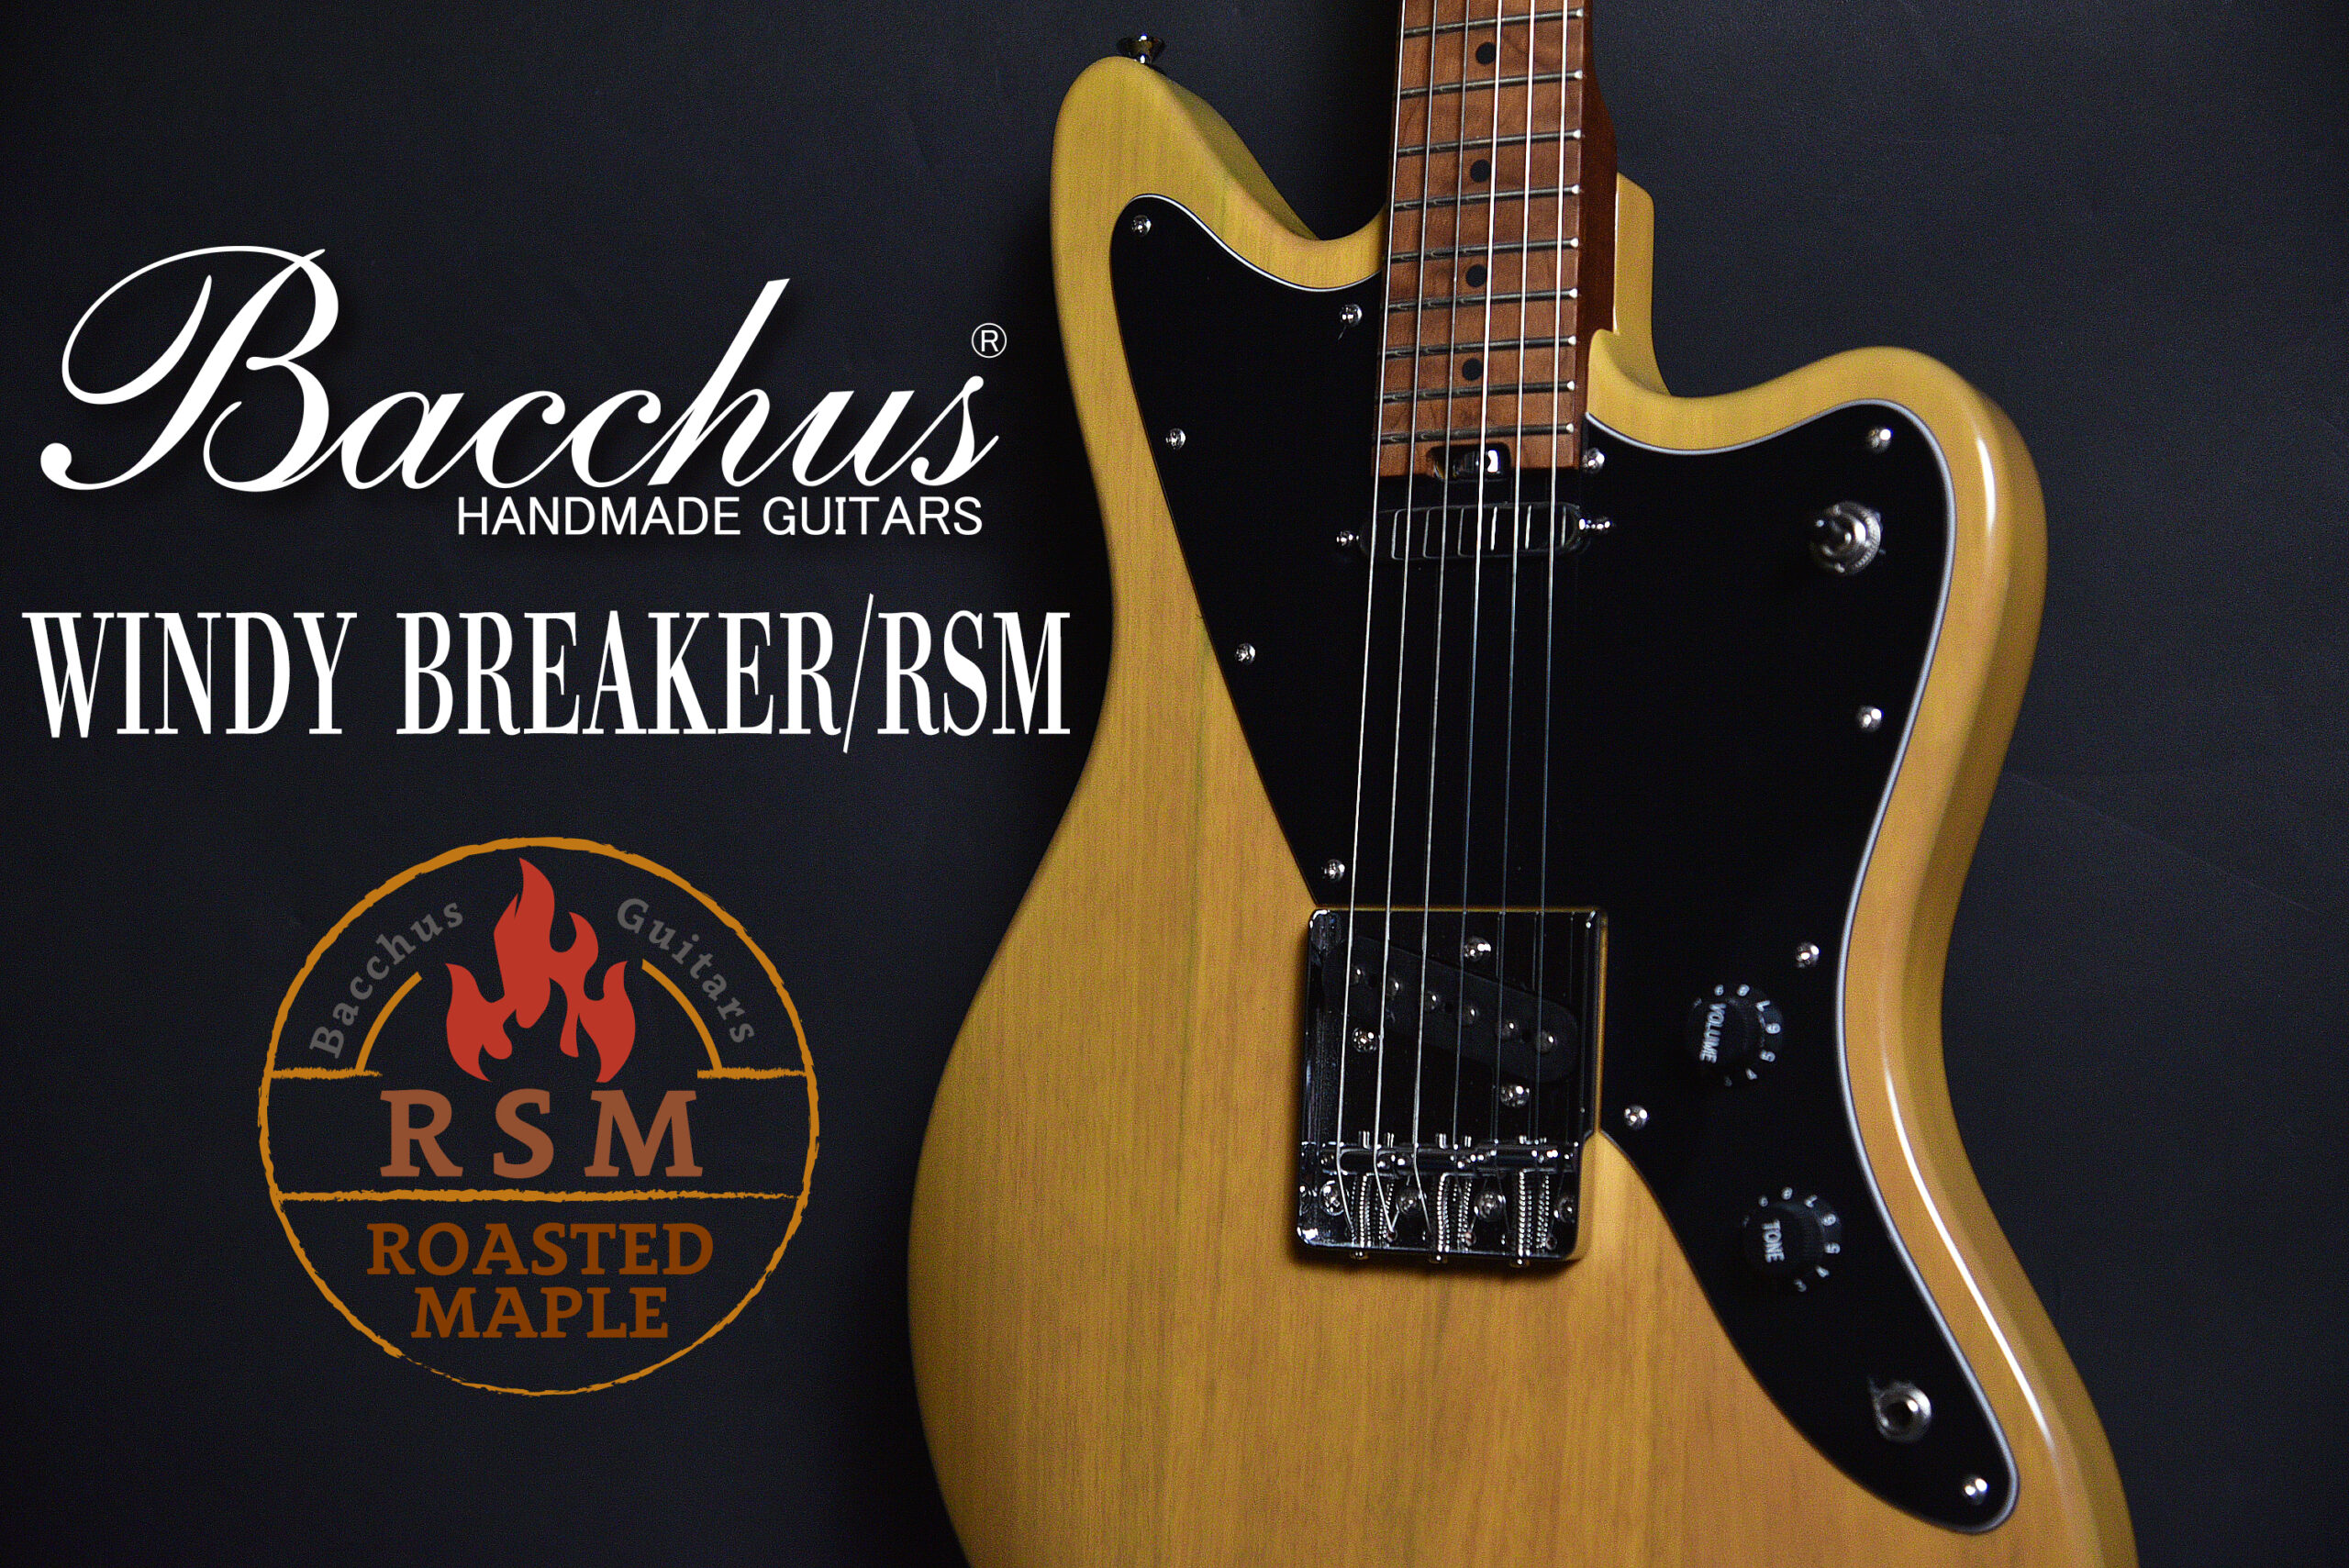 Bacchus Global】A new and unique offset model『WINDY BREAKER/RSM